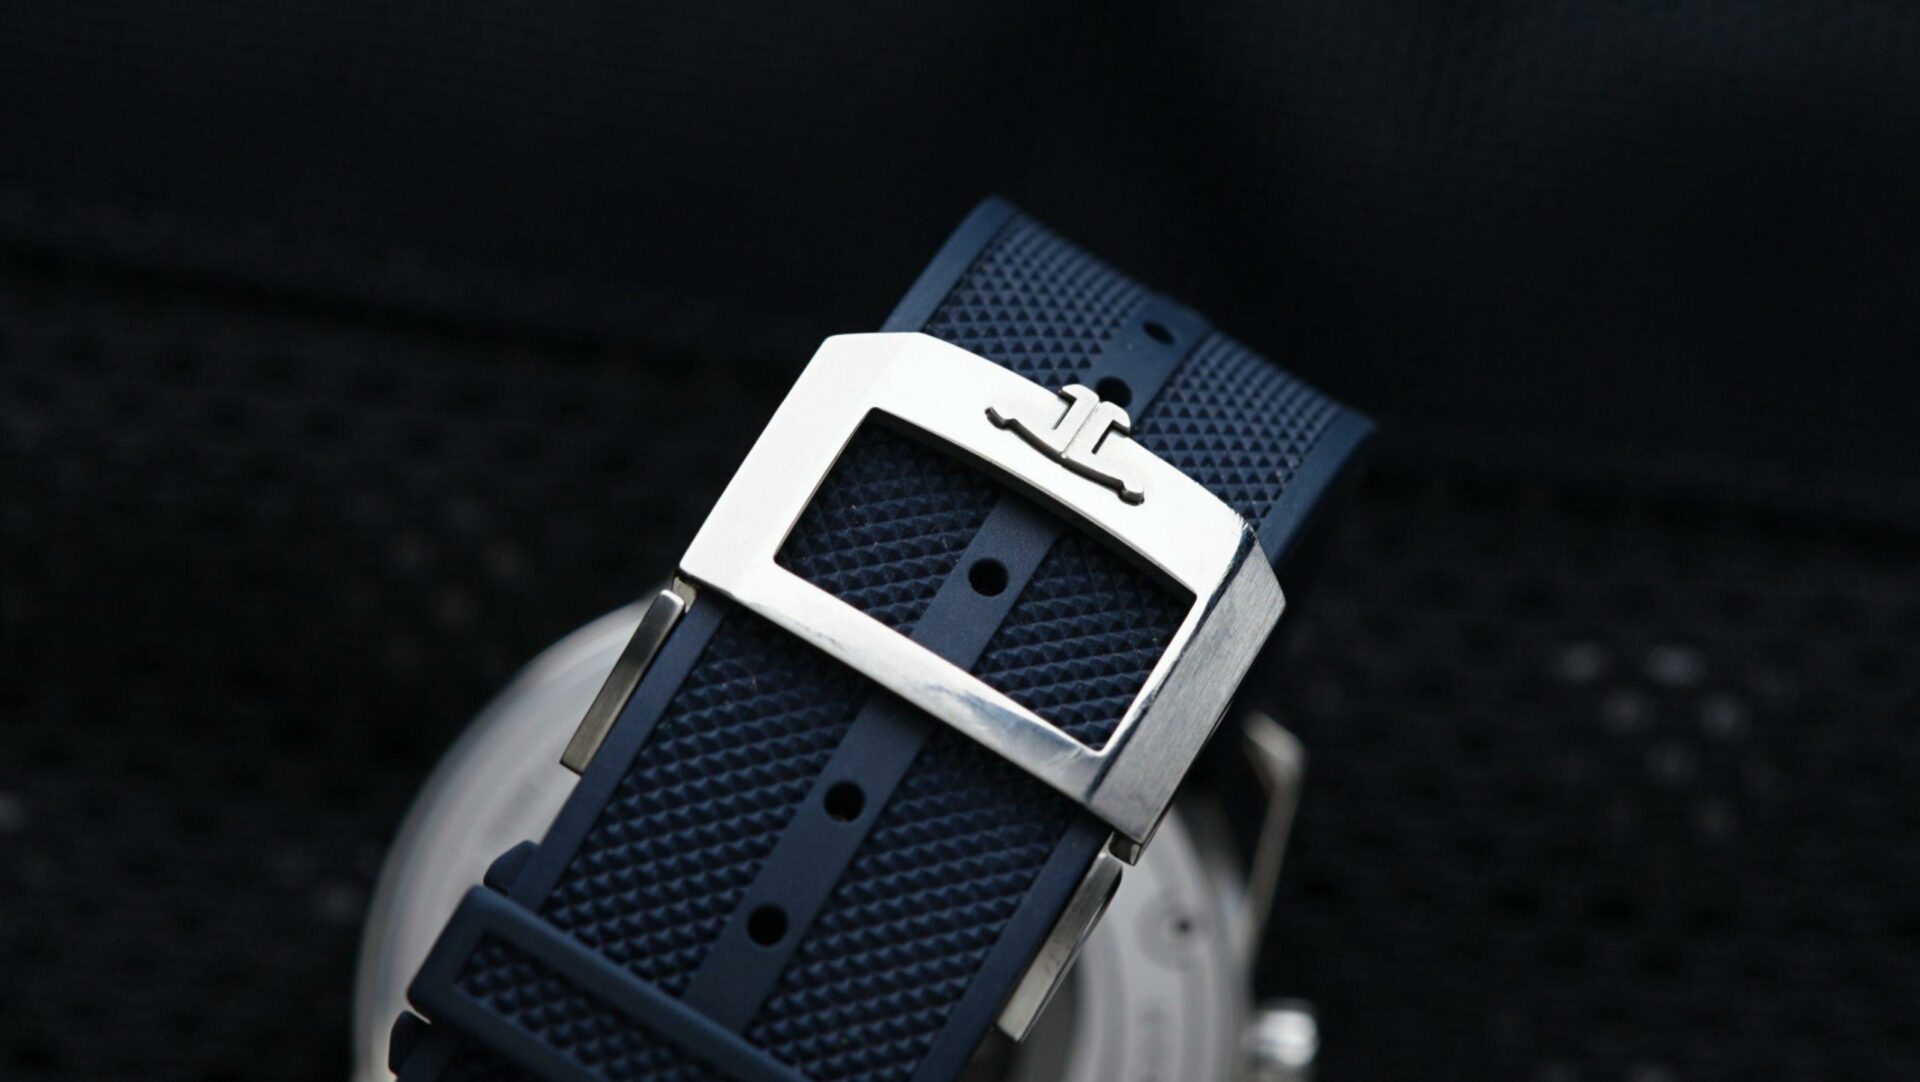 Strap and bracelet for the Jaeger-LeCoultre Polaris Limited Stunning Blue Dial watch.